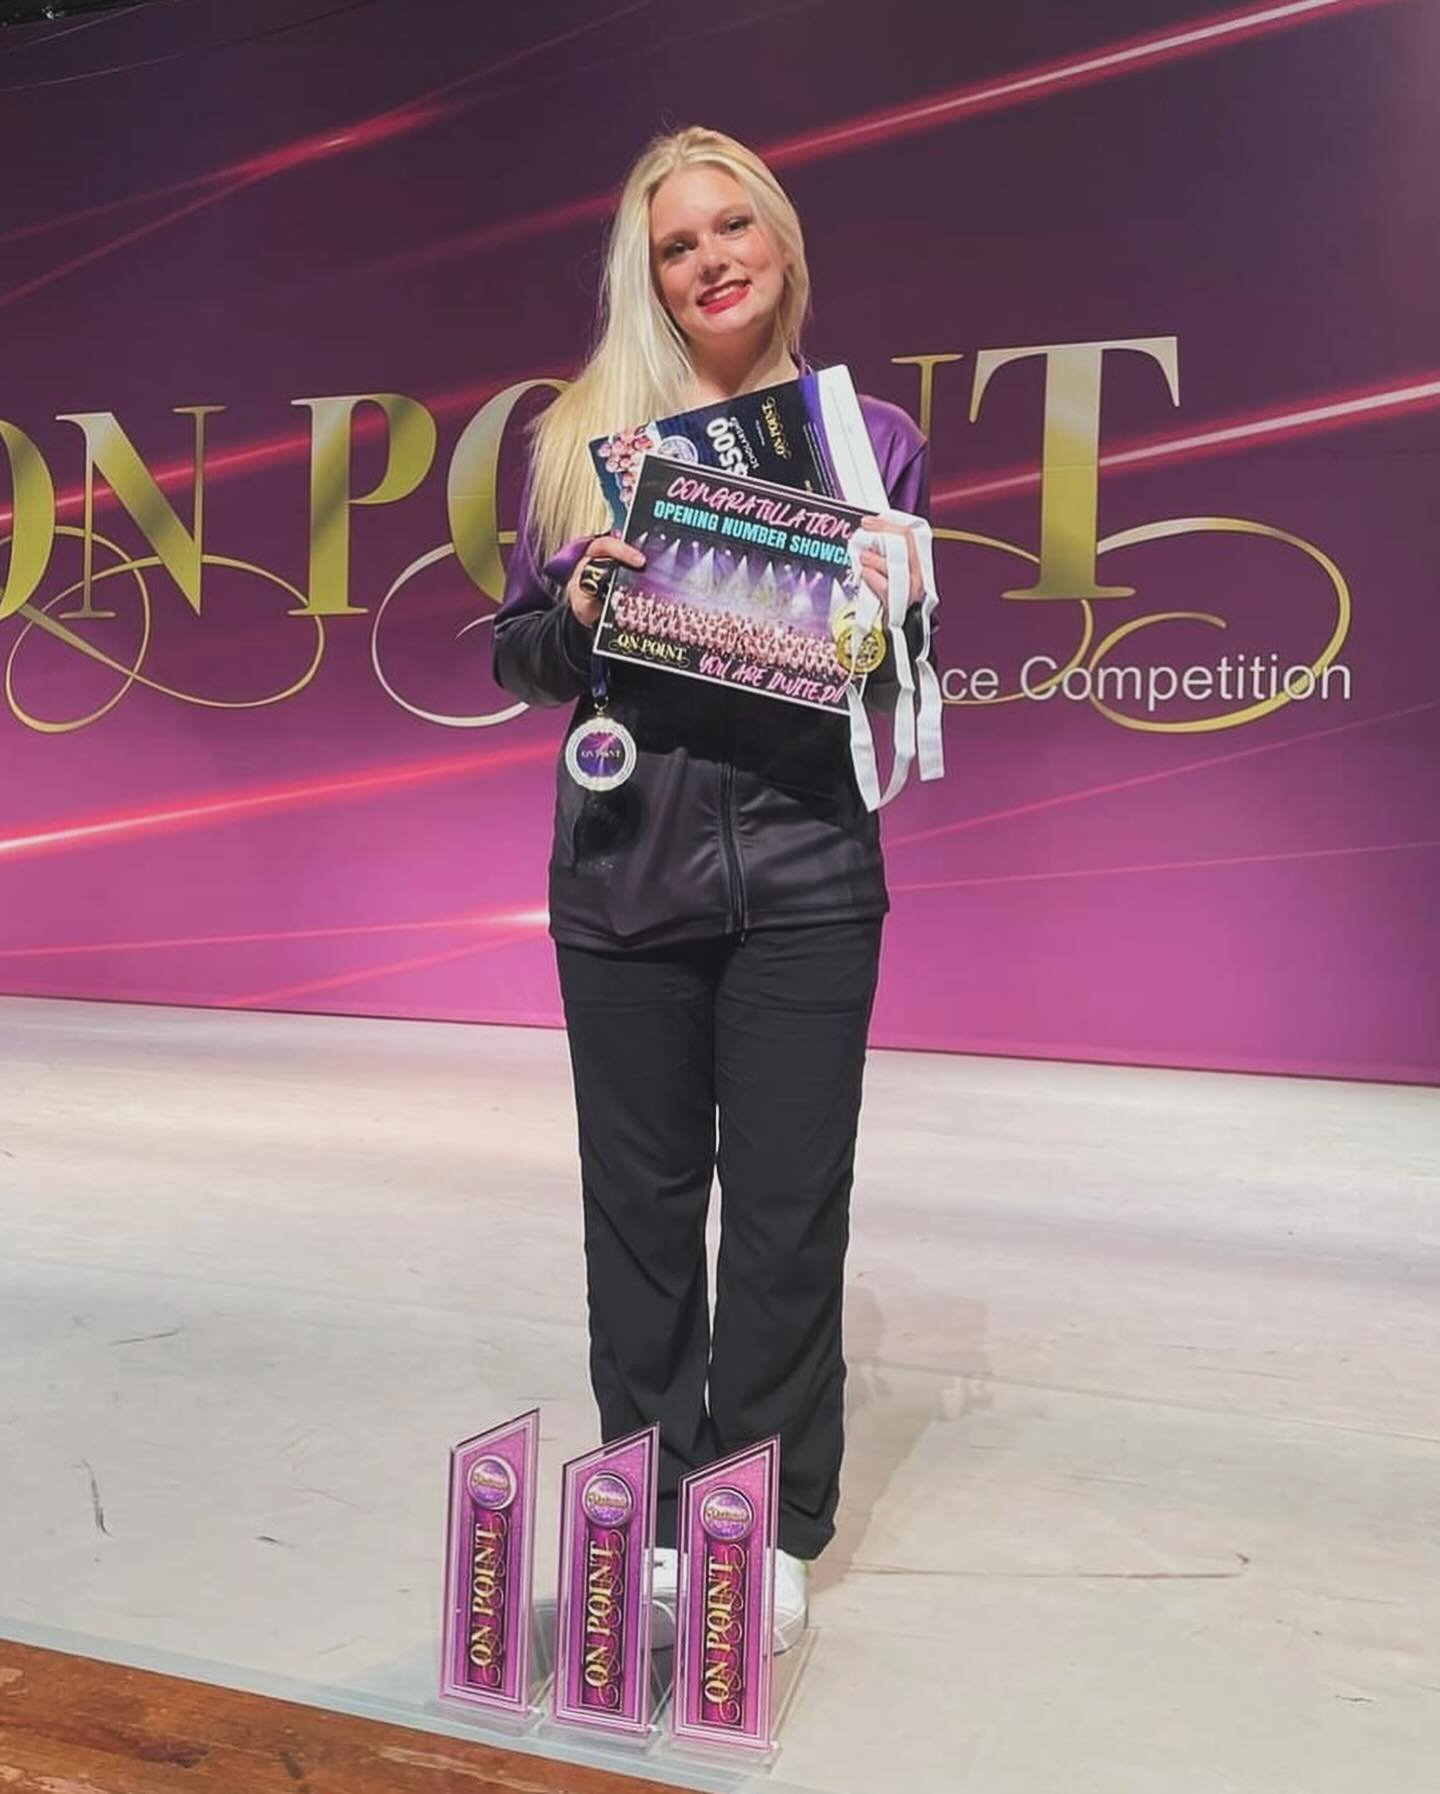 DAY 1️⃣ OVERALLS @onpointdancecompetition

TEEN ADV SOLOS
4th &bull; Internal (Natalie)
20th &bull; Energy (Amali)

TEEN ADV DUO/TRIOS
🥈 Body Language
🥉 All Ties Are Coming to an End

TEEN INT SOLOS
🥉 Witching Season (Matilda)